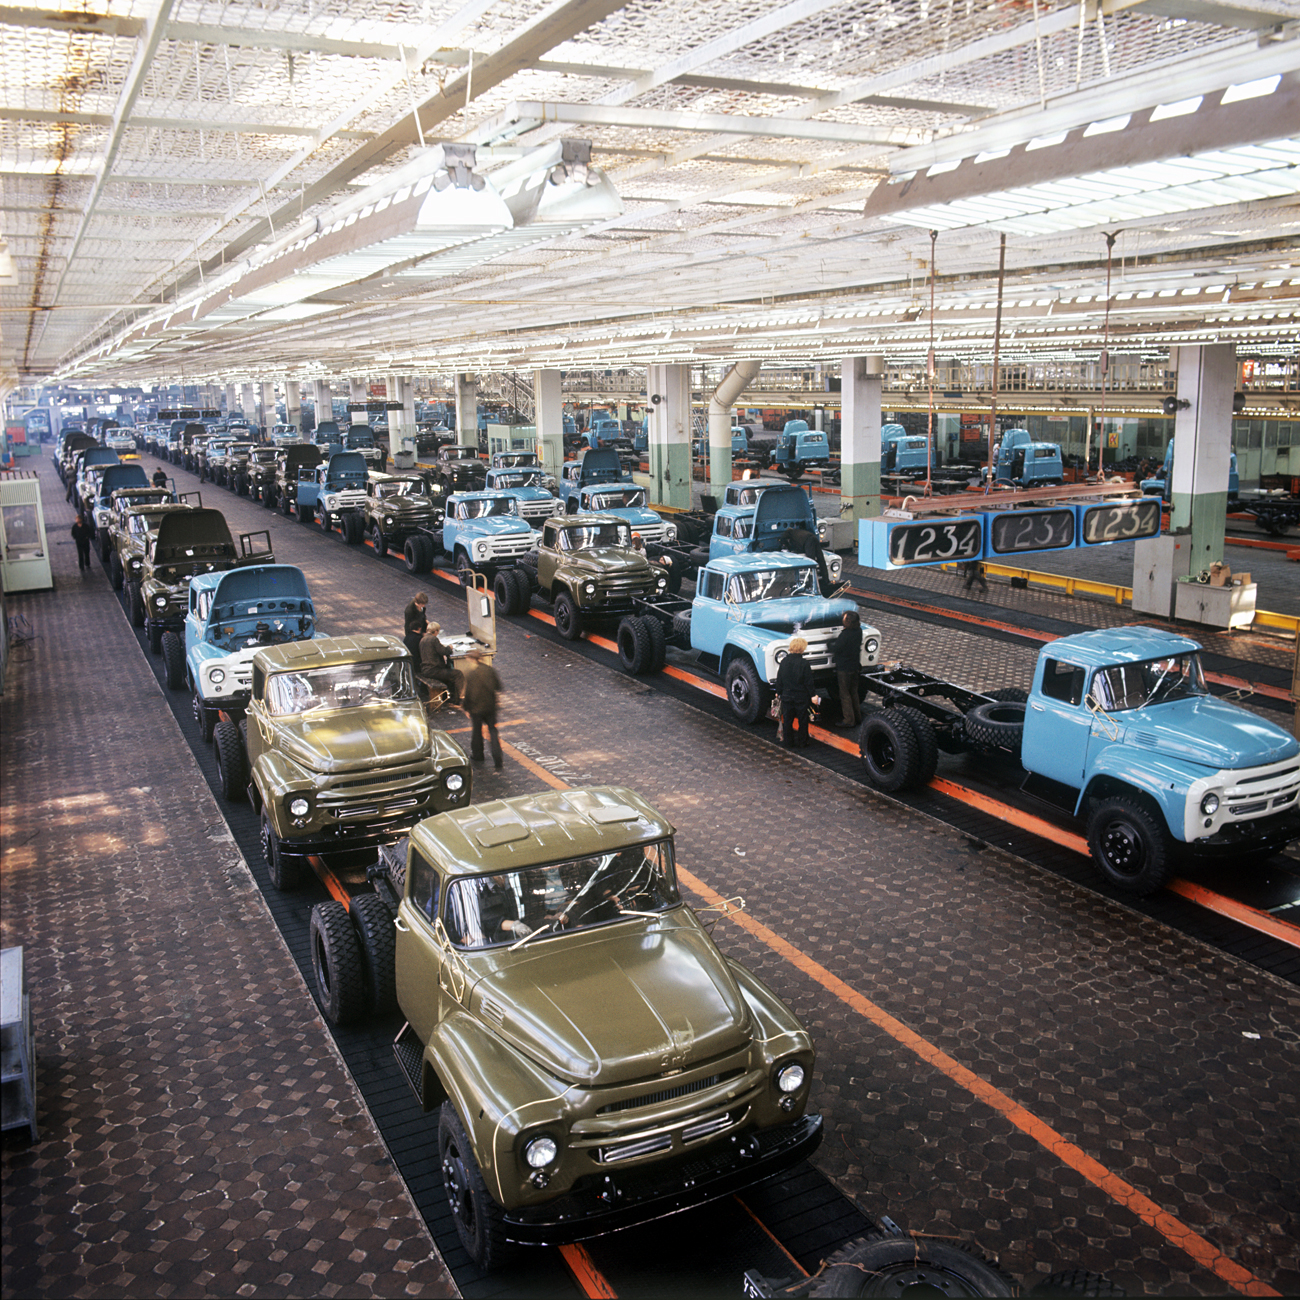  A view of the assembly line of the new assembling workshop at Moscow`s ZiL Plant.  / Source: Valentin Sobolev/TASS